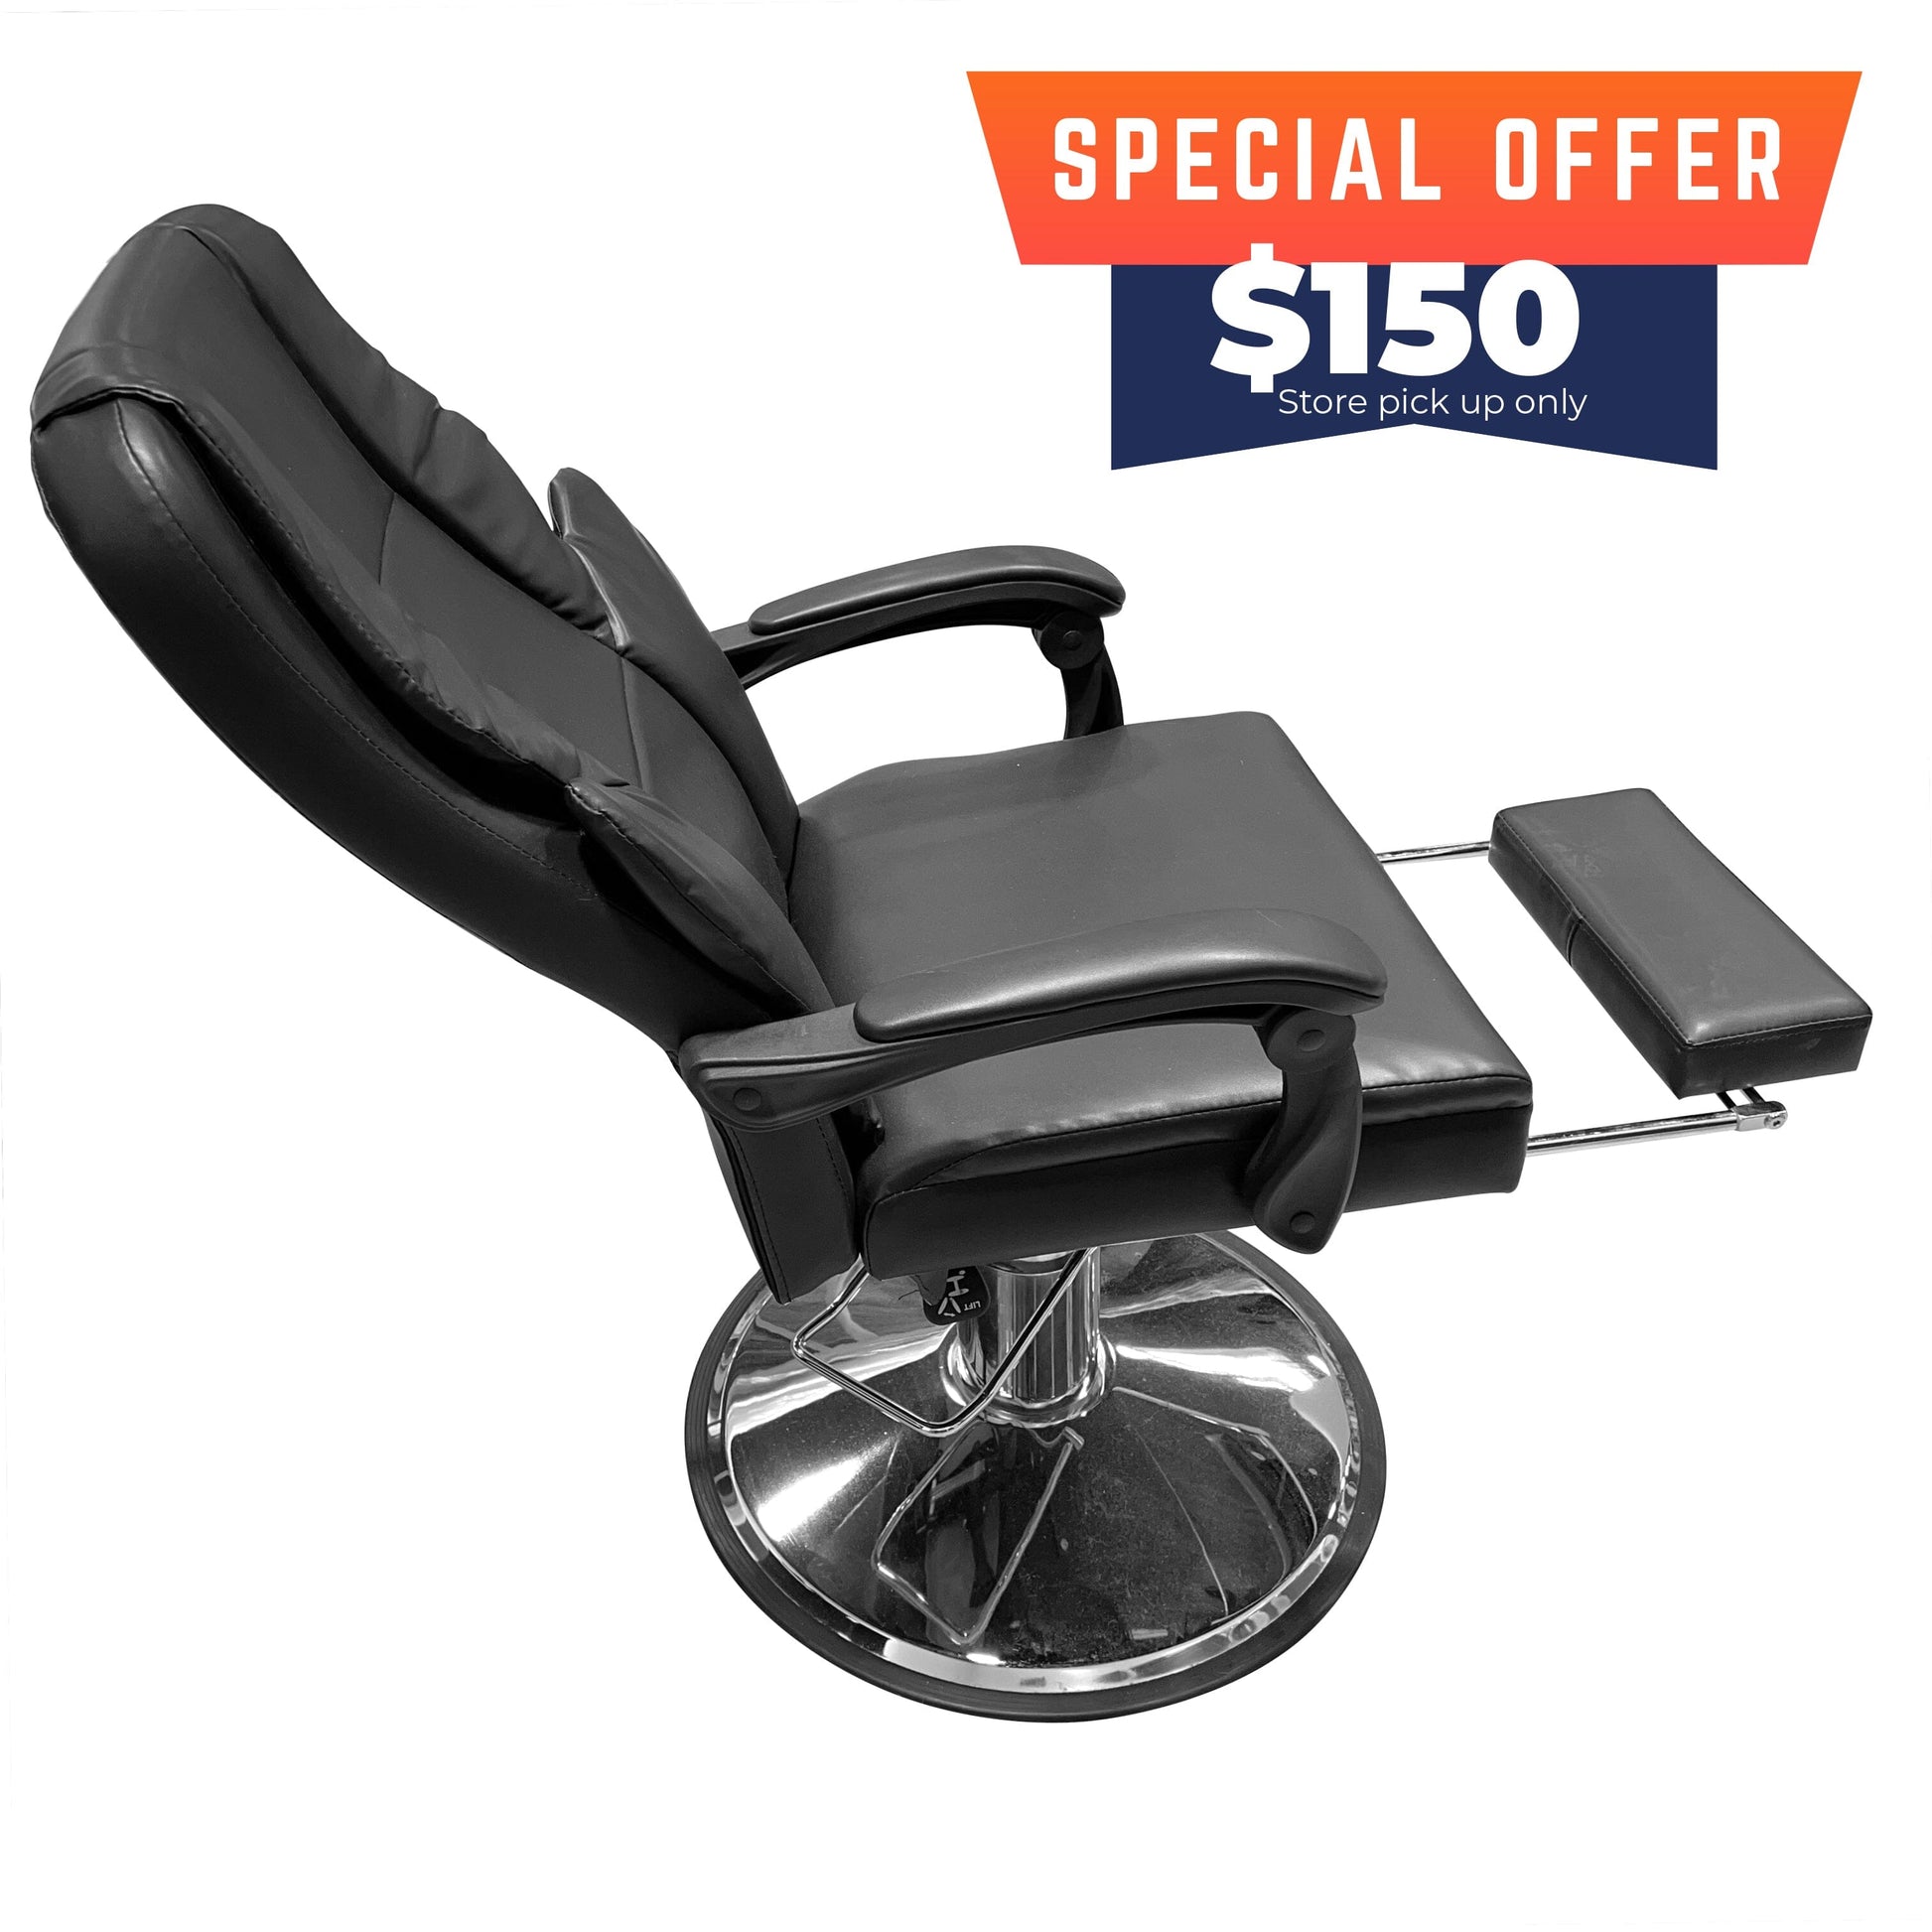 KA1308 | All Purpose Chair | Facial | Nails | Waxing | Barber and Stylist Hair Salon Accessories SALON CHAIRS SSW 